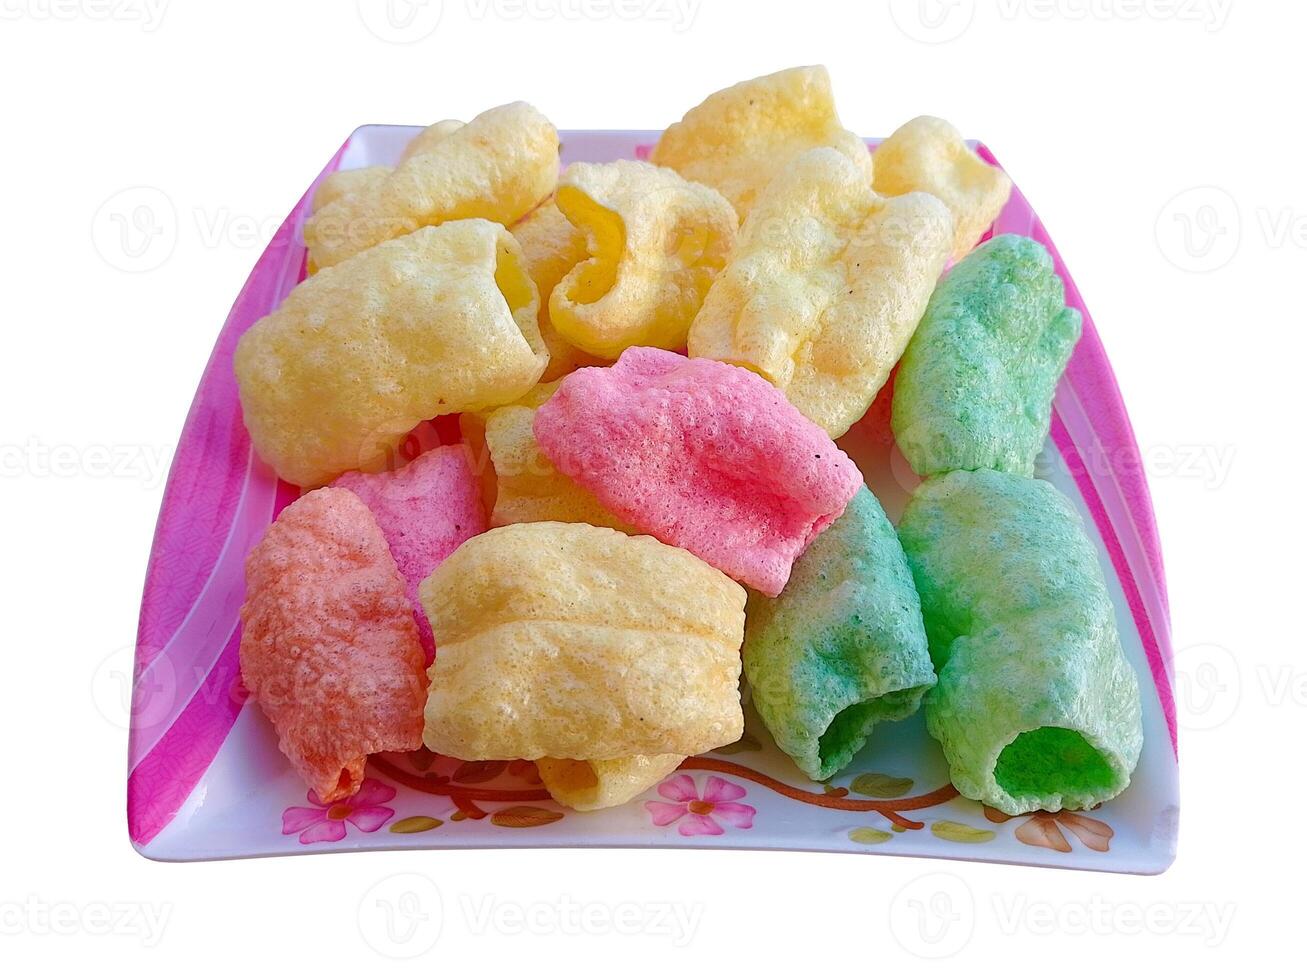 Handmade Colorful and Tasty Prawn Cracker - Crunchy and Salty Snacks photo